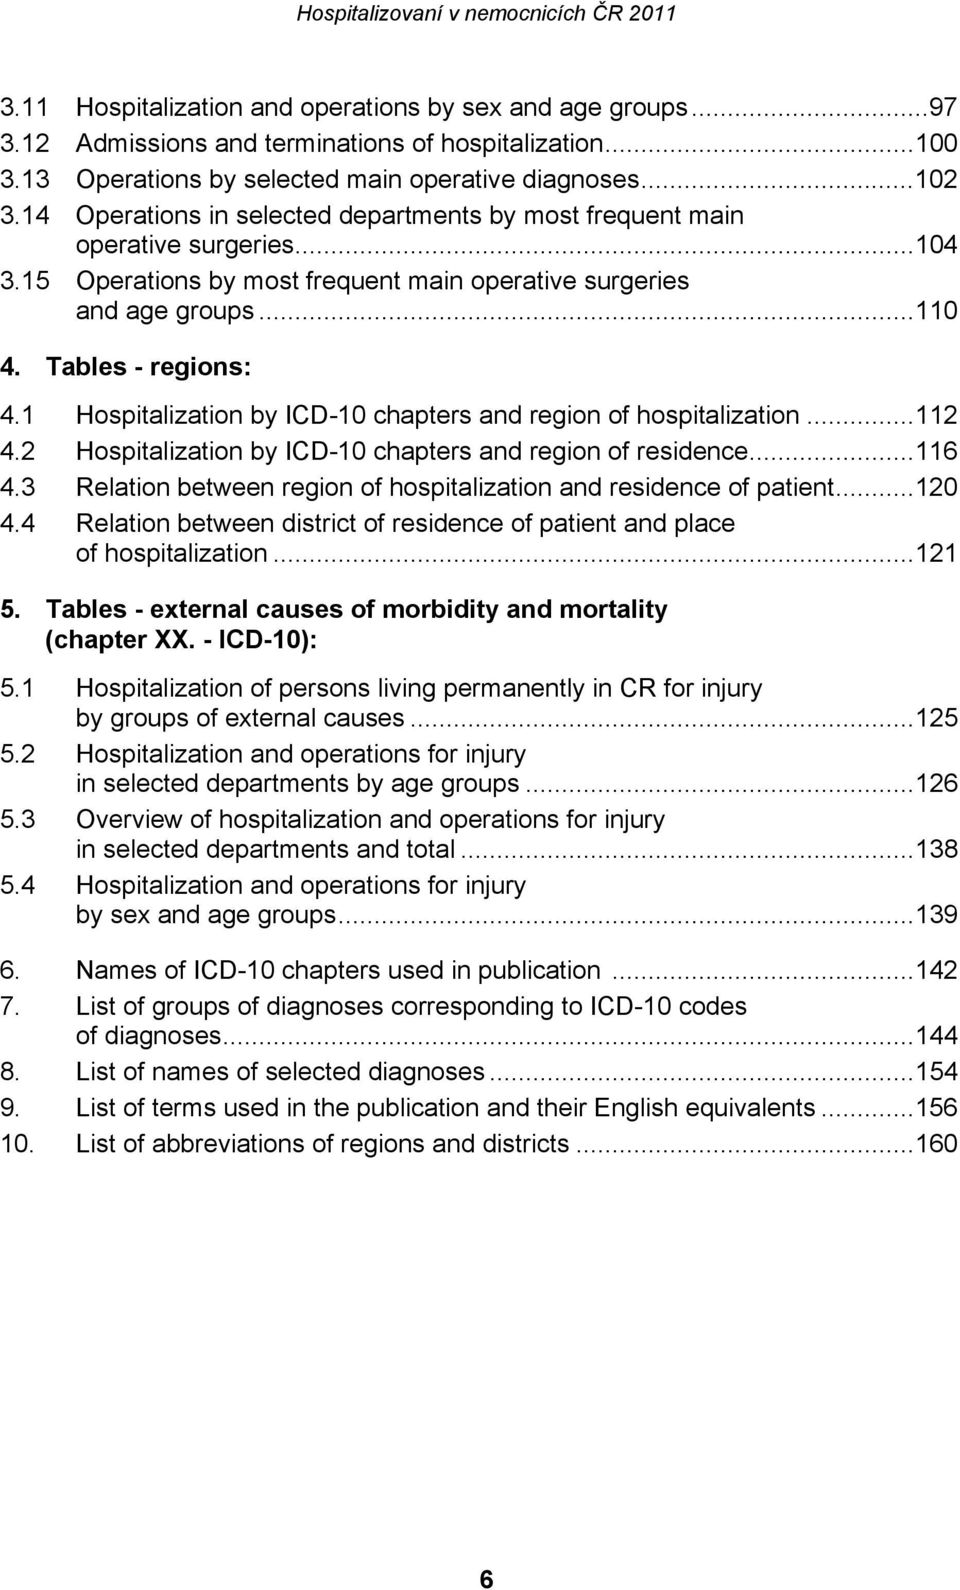 1 Hospitalization by ICD-10 chapters and region of hospitalization...112 4.2 Hospitalization by ICD-10 chapters and region of residence...116 4.